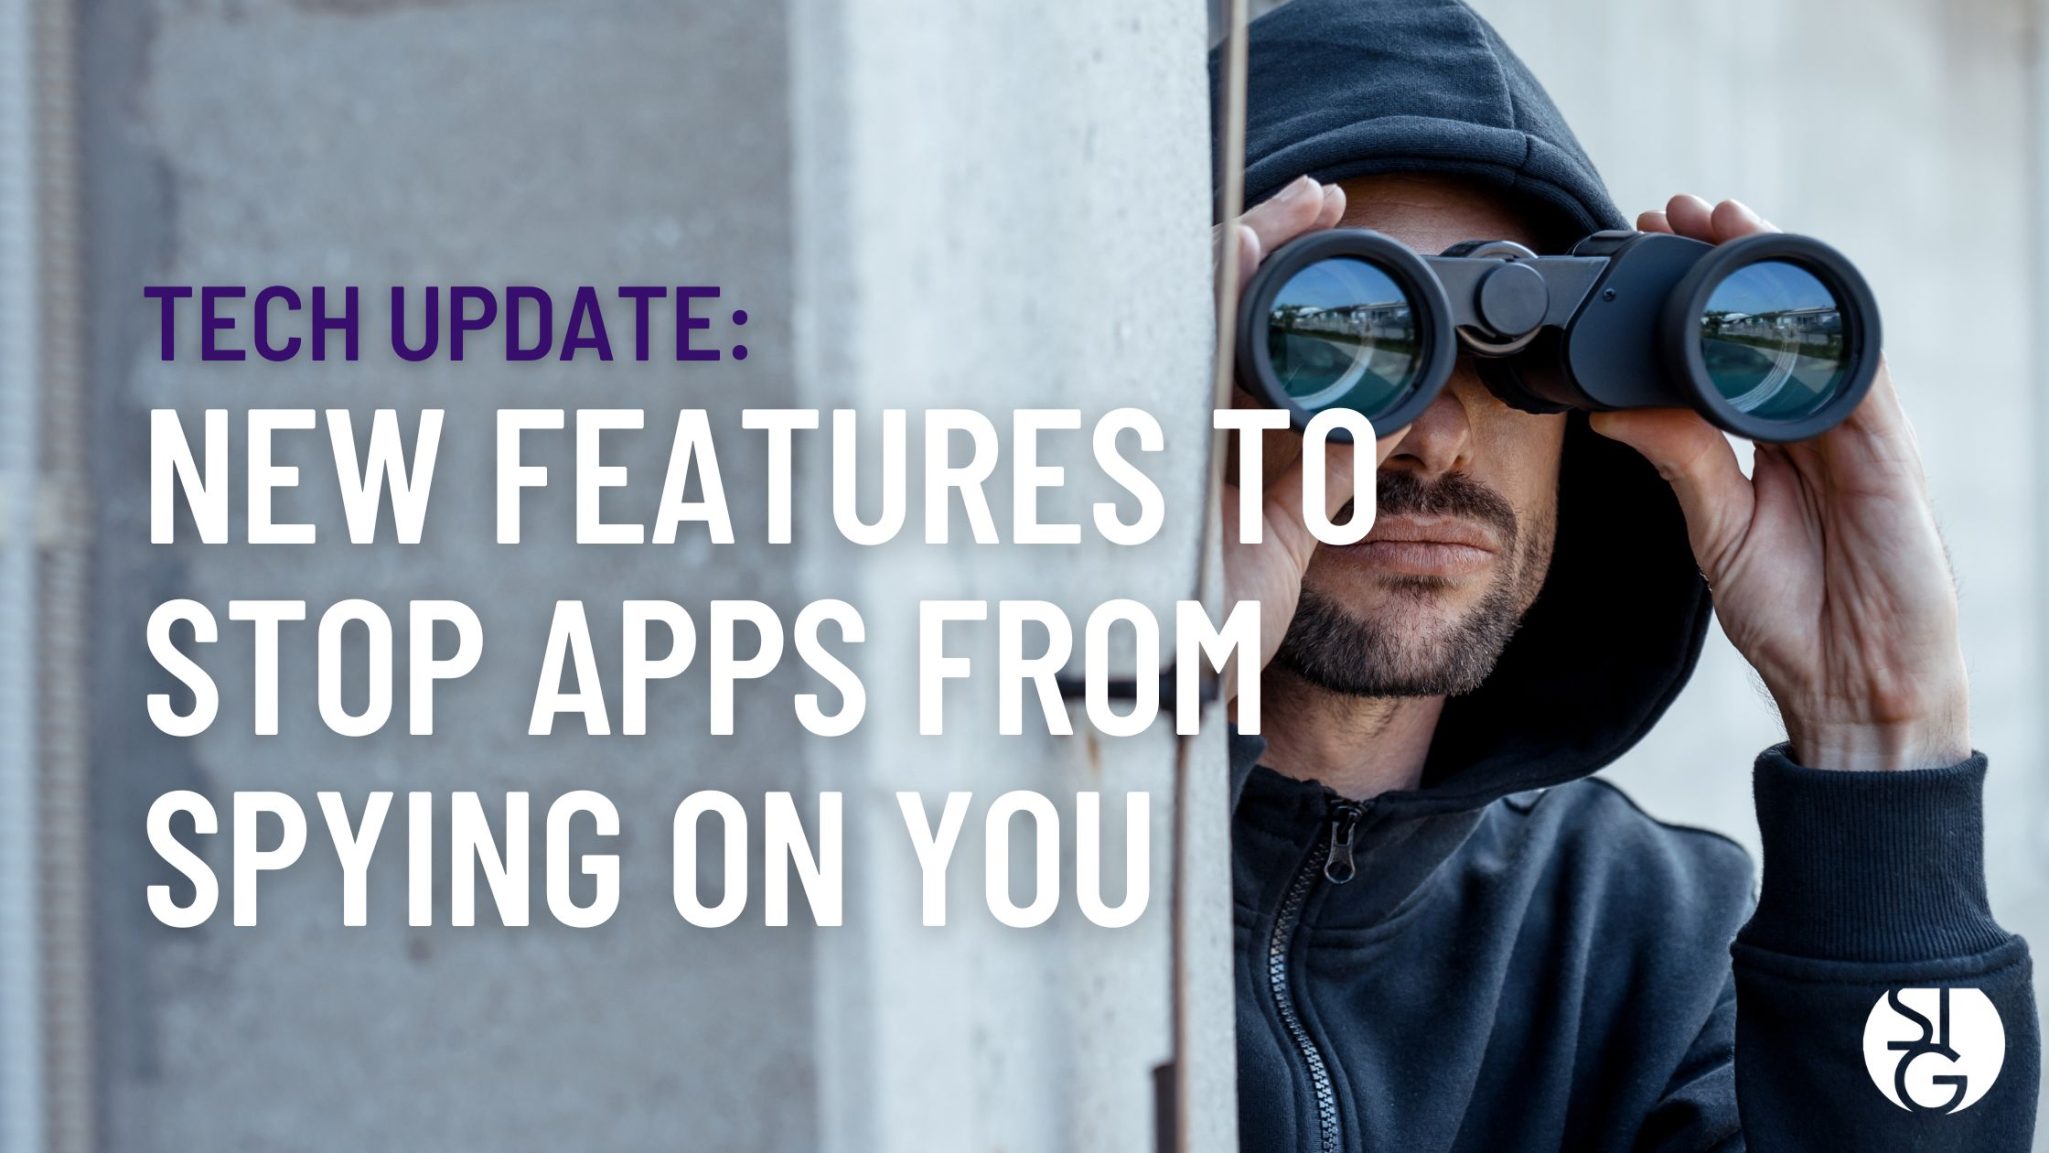 New Features To Stop Apps From Spying on You